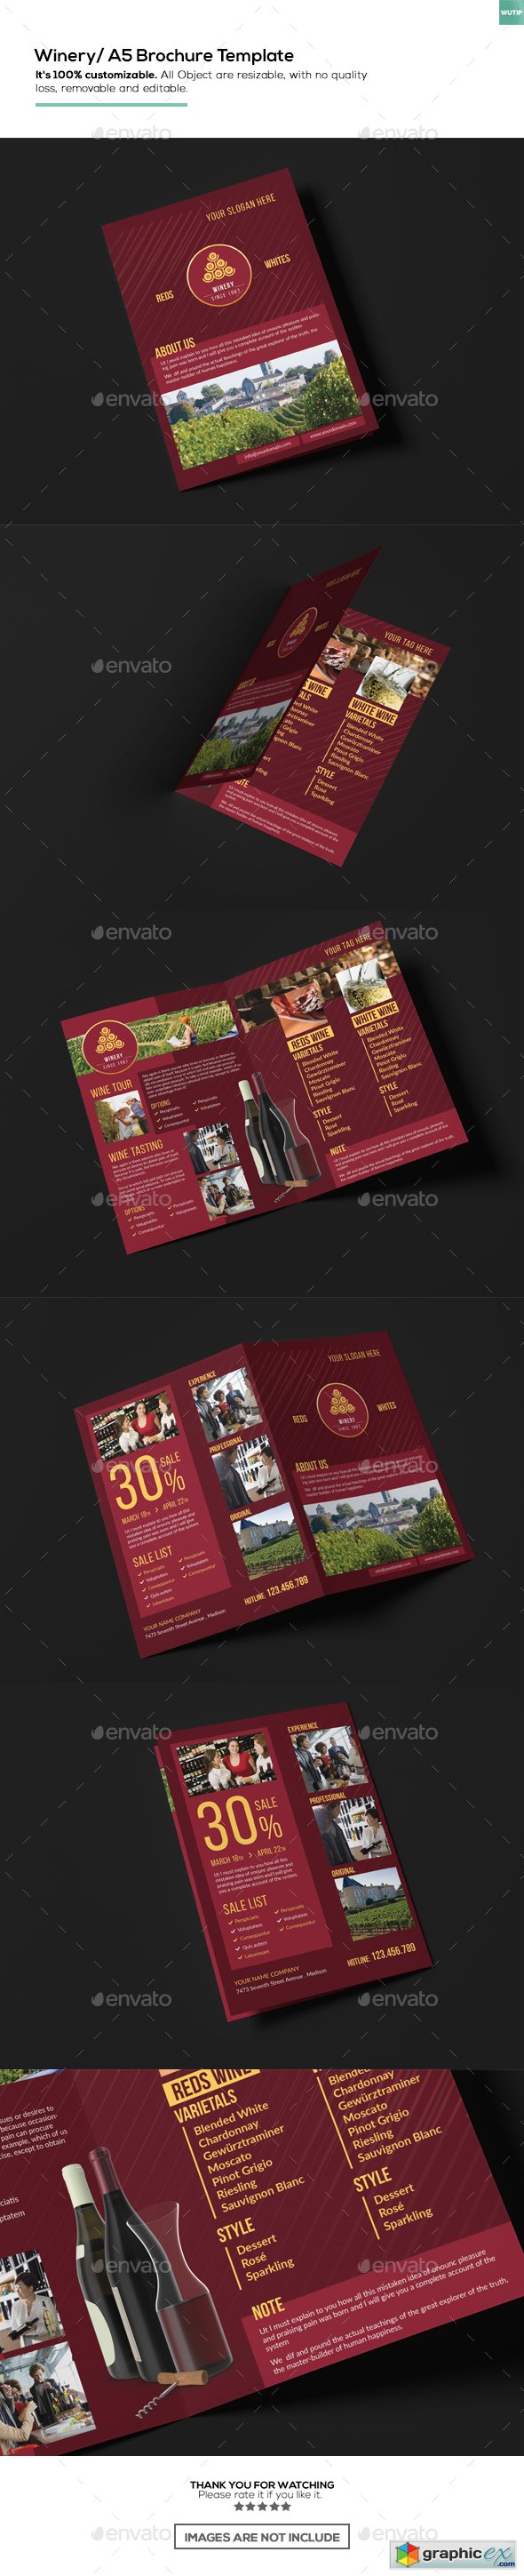 Winery/ A5 Brochure Template